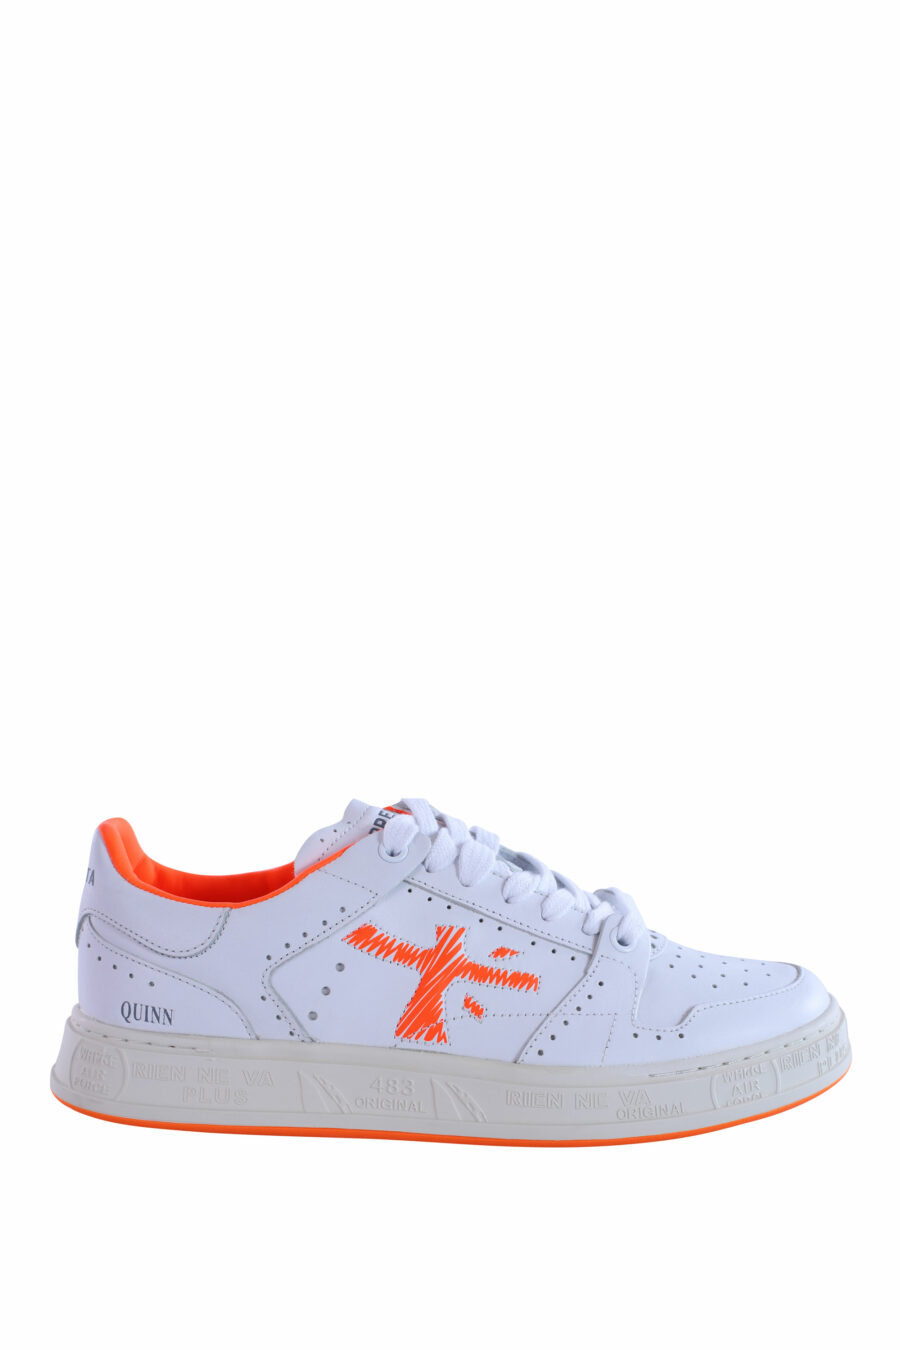 White trainers with orange "quinn 6302" - IMG 2994